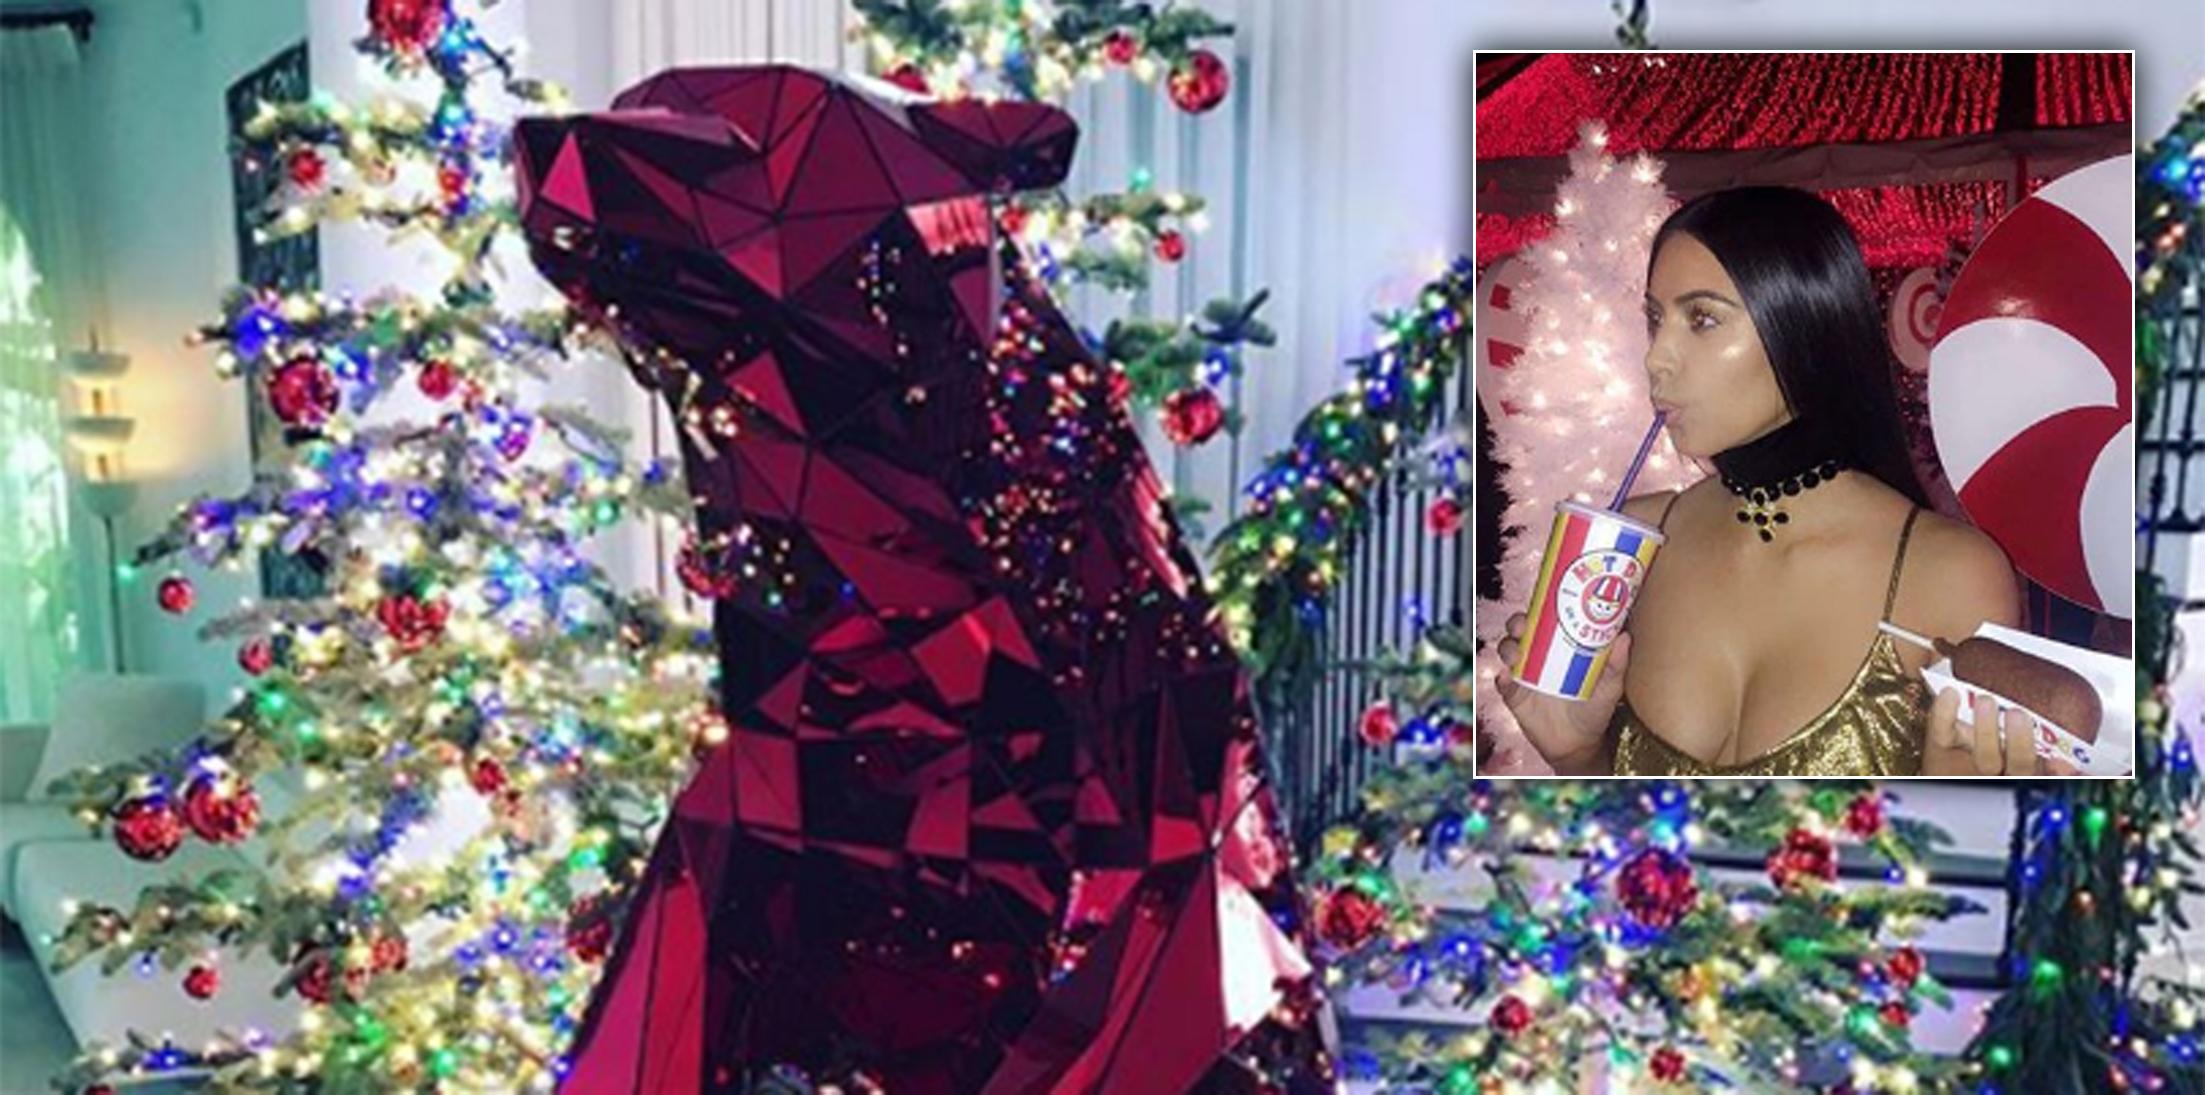 A Kardashian Christmas! Here’s How They Celebrate The Holidays